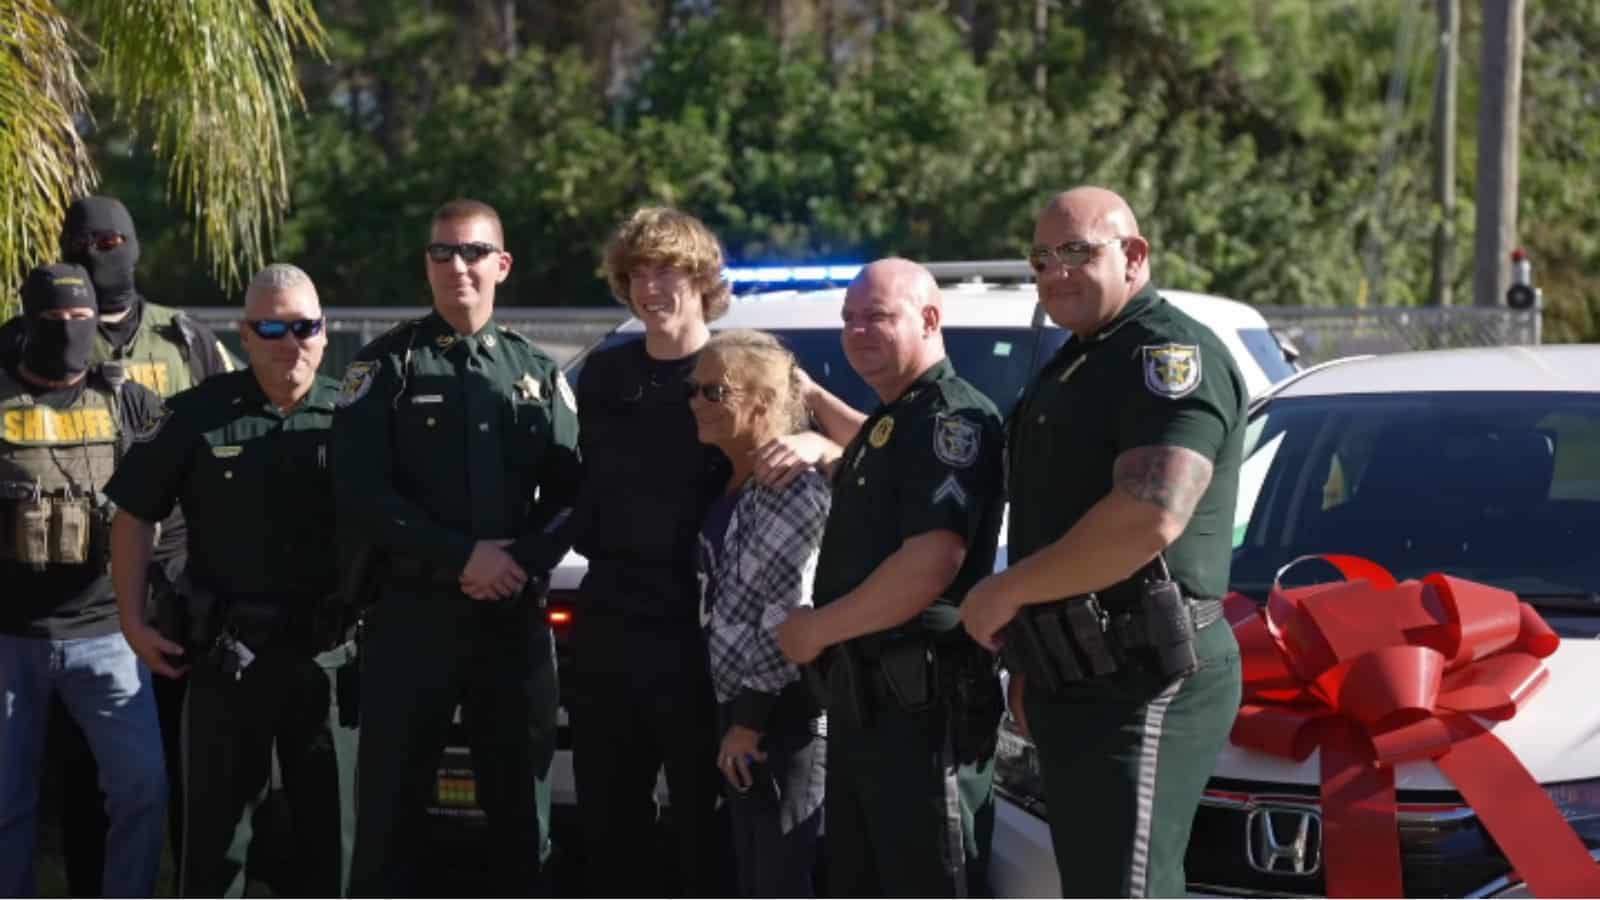 Danny Duncan poses with police and a woman with a new car